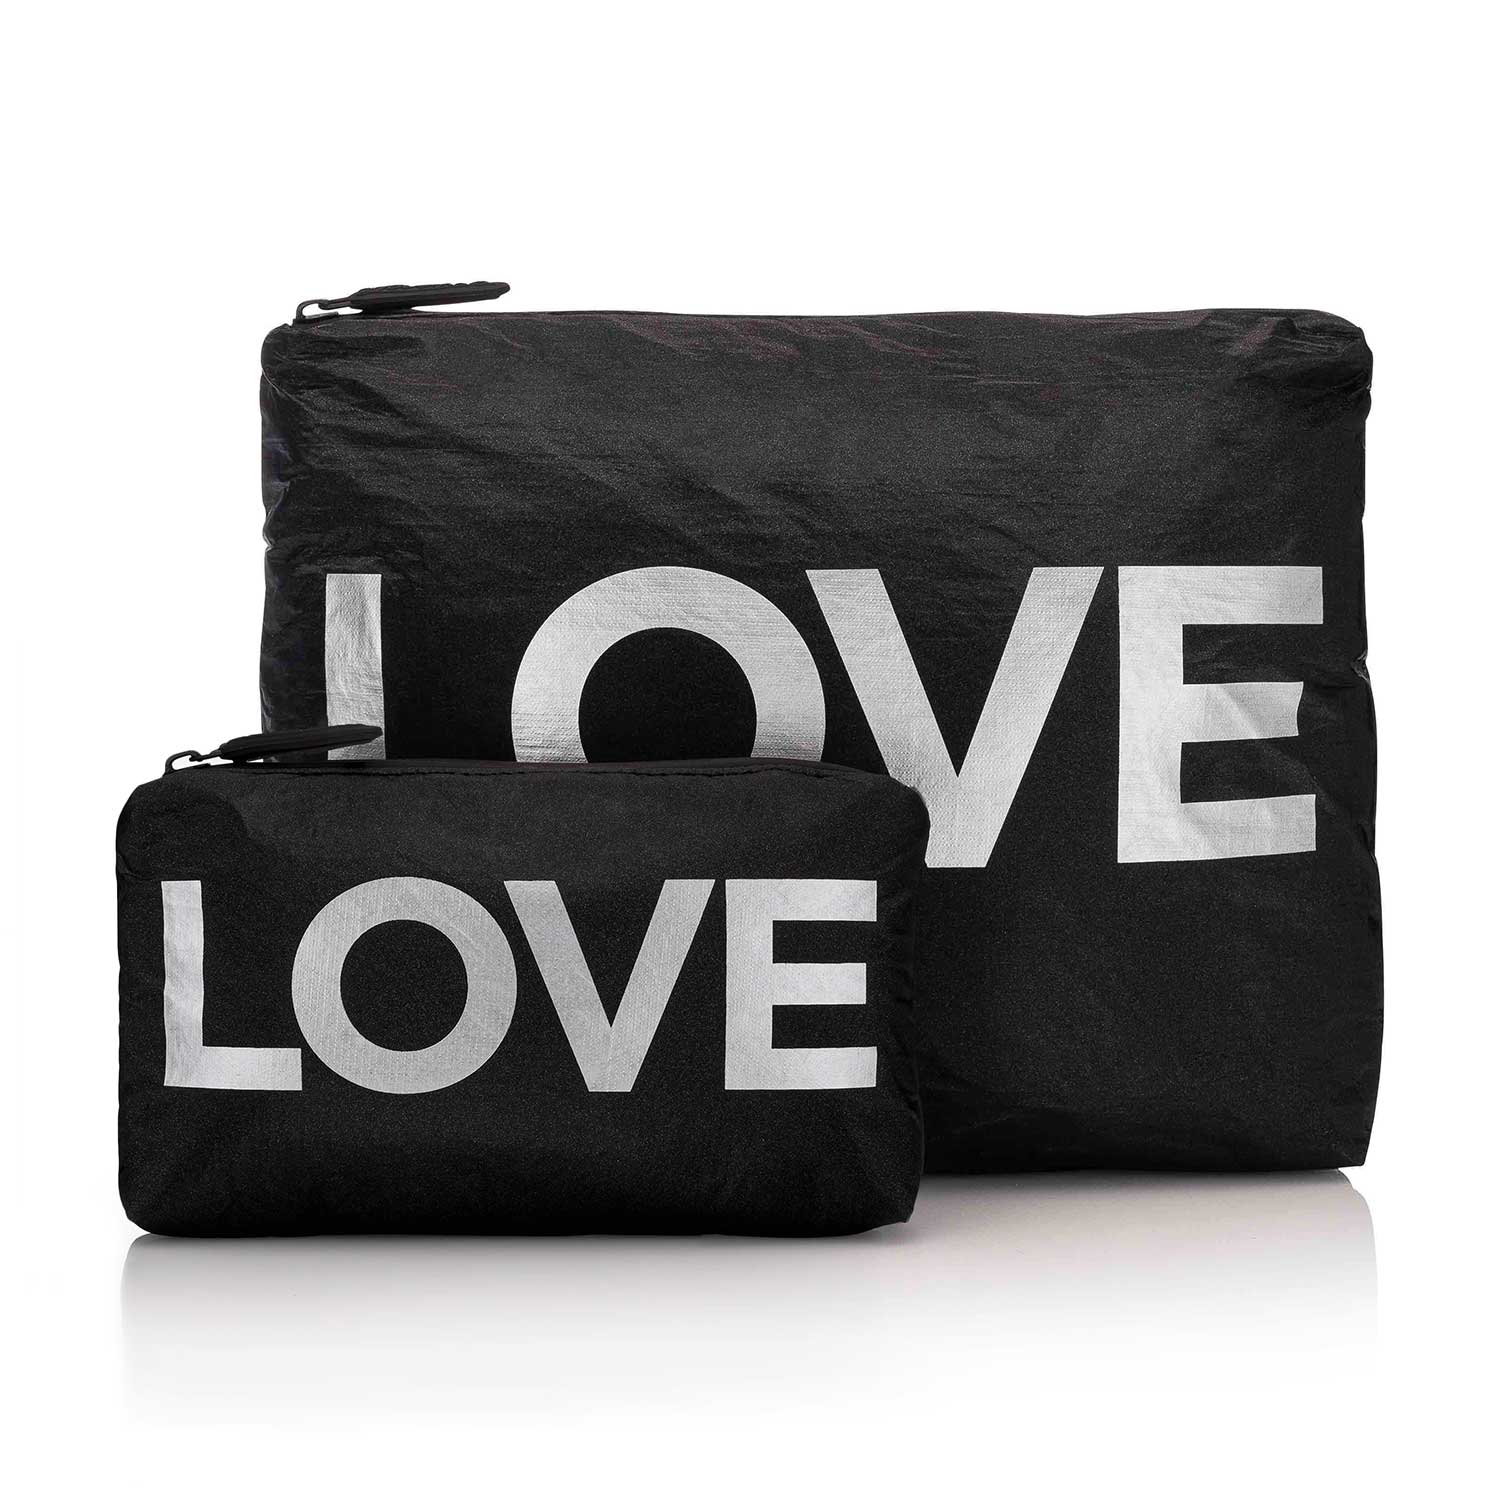 Set of Two - Organizational Packs - Black with Silver "LOVE"